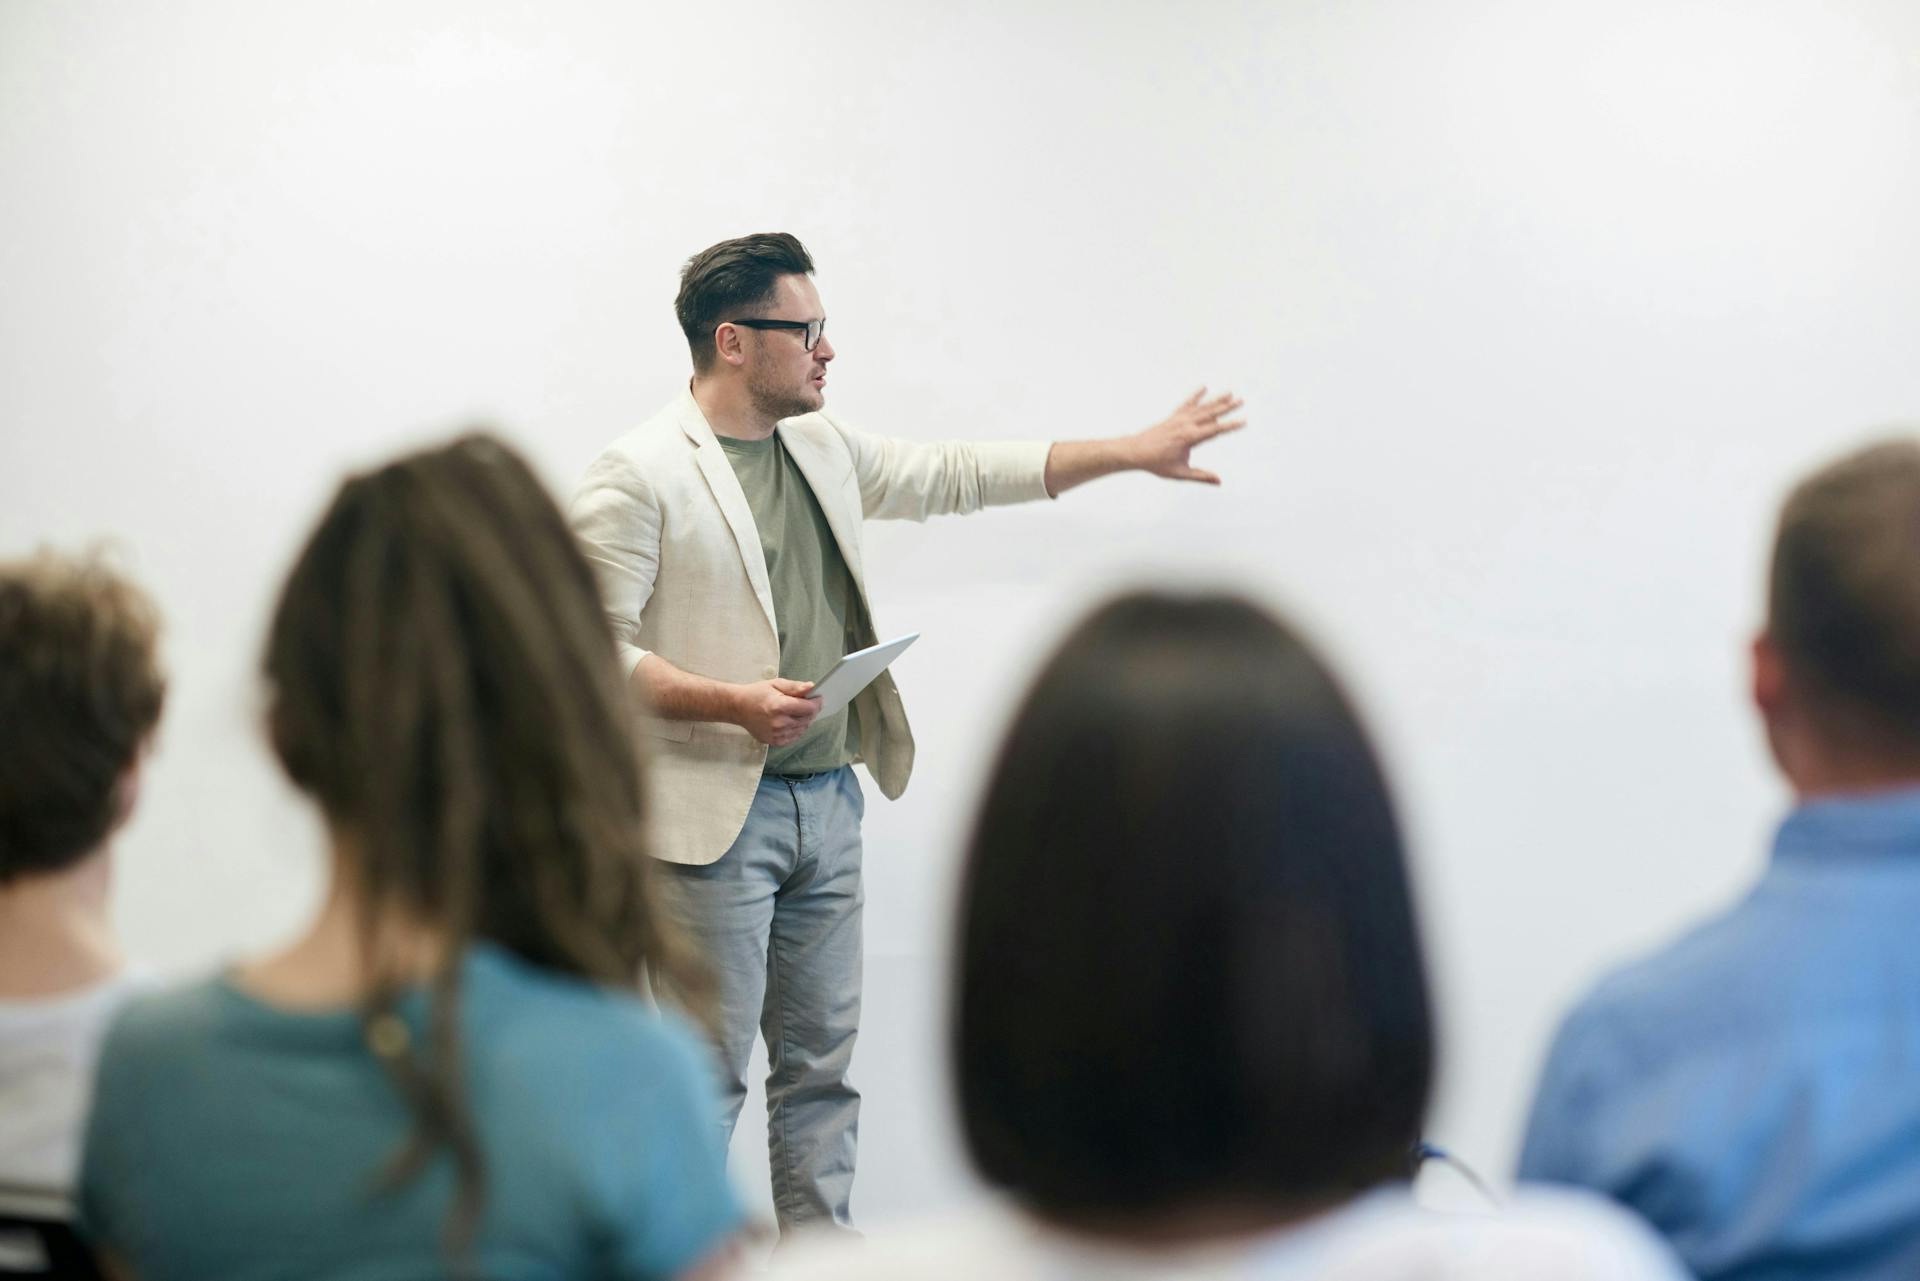 Considering becoming a university lecturer in Australia? Learn about the rewarding career path, growth opportunities, required skills, and salary expectations